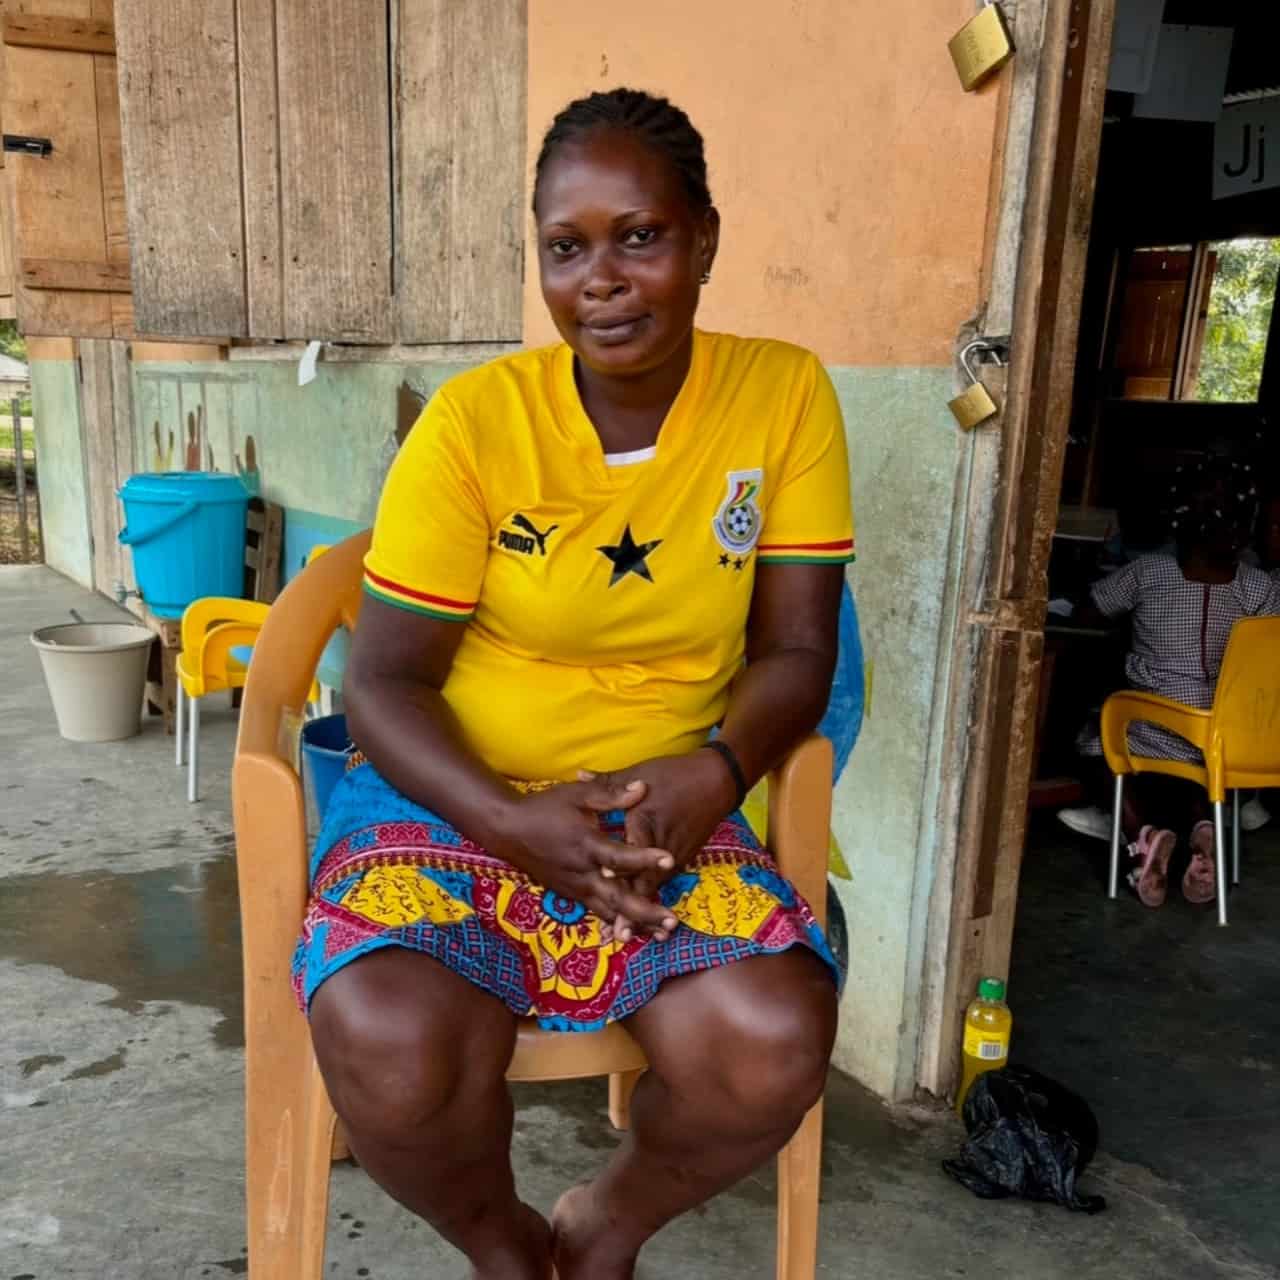 Mercy in a yellow tshirt and colourful skirt sitting in a chair in front of the creche